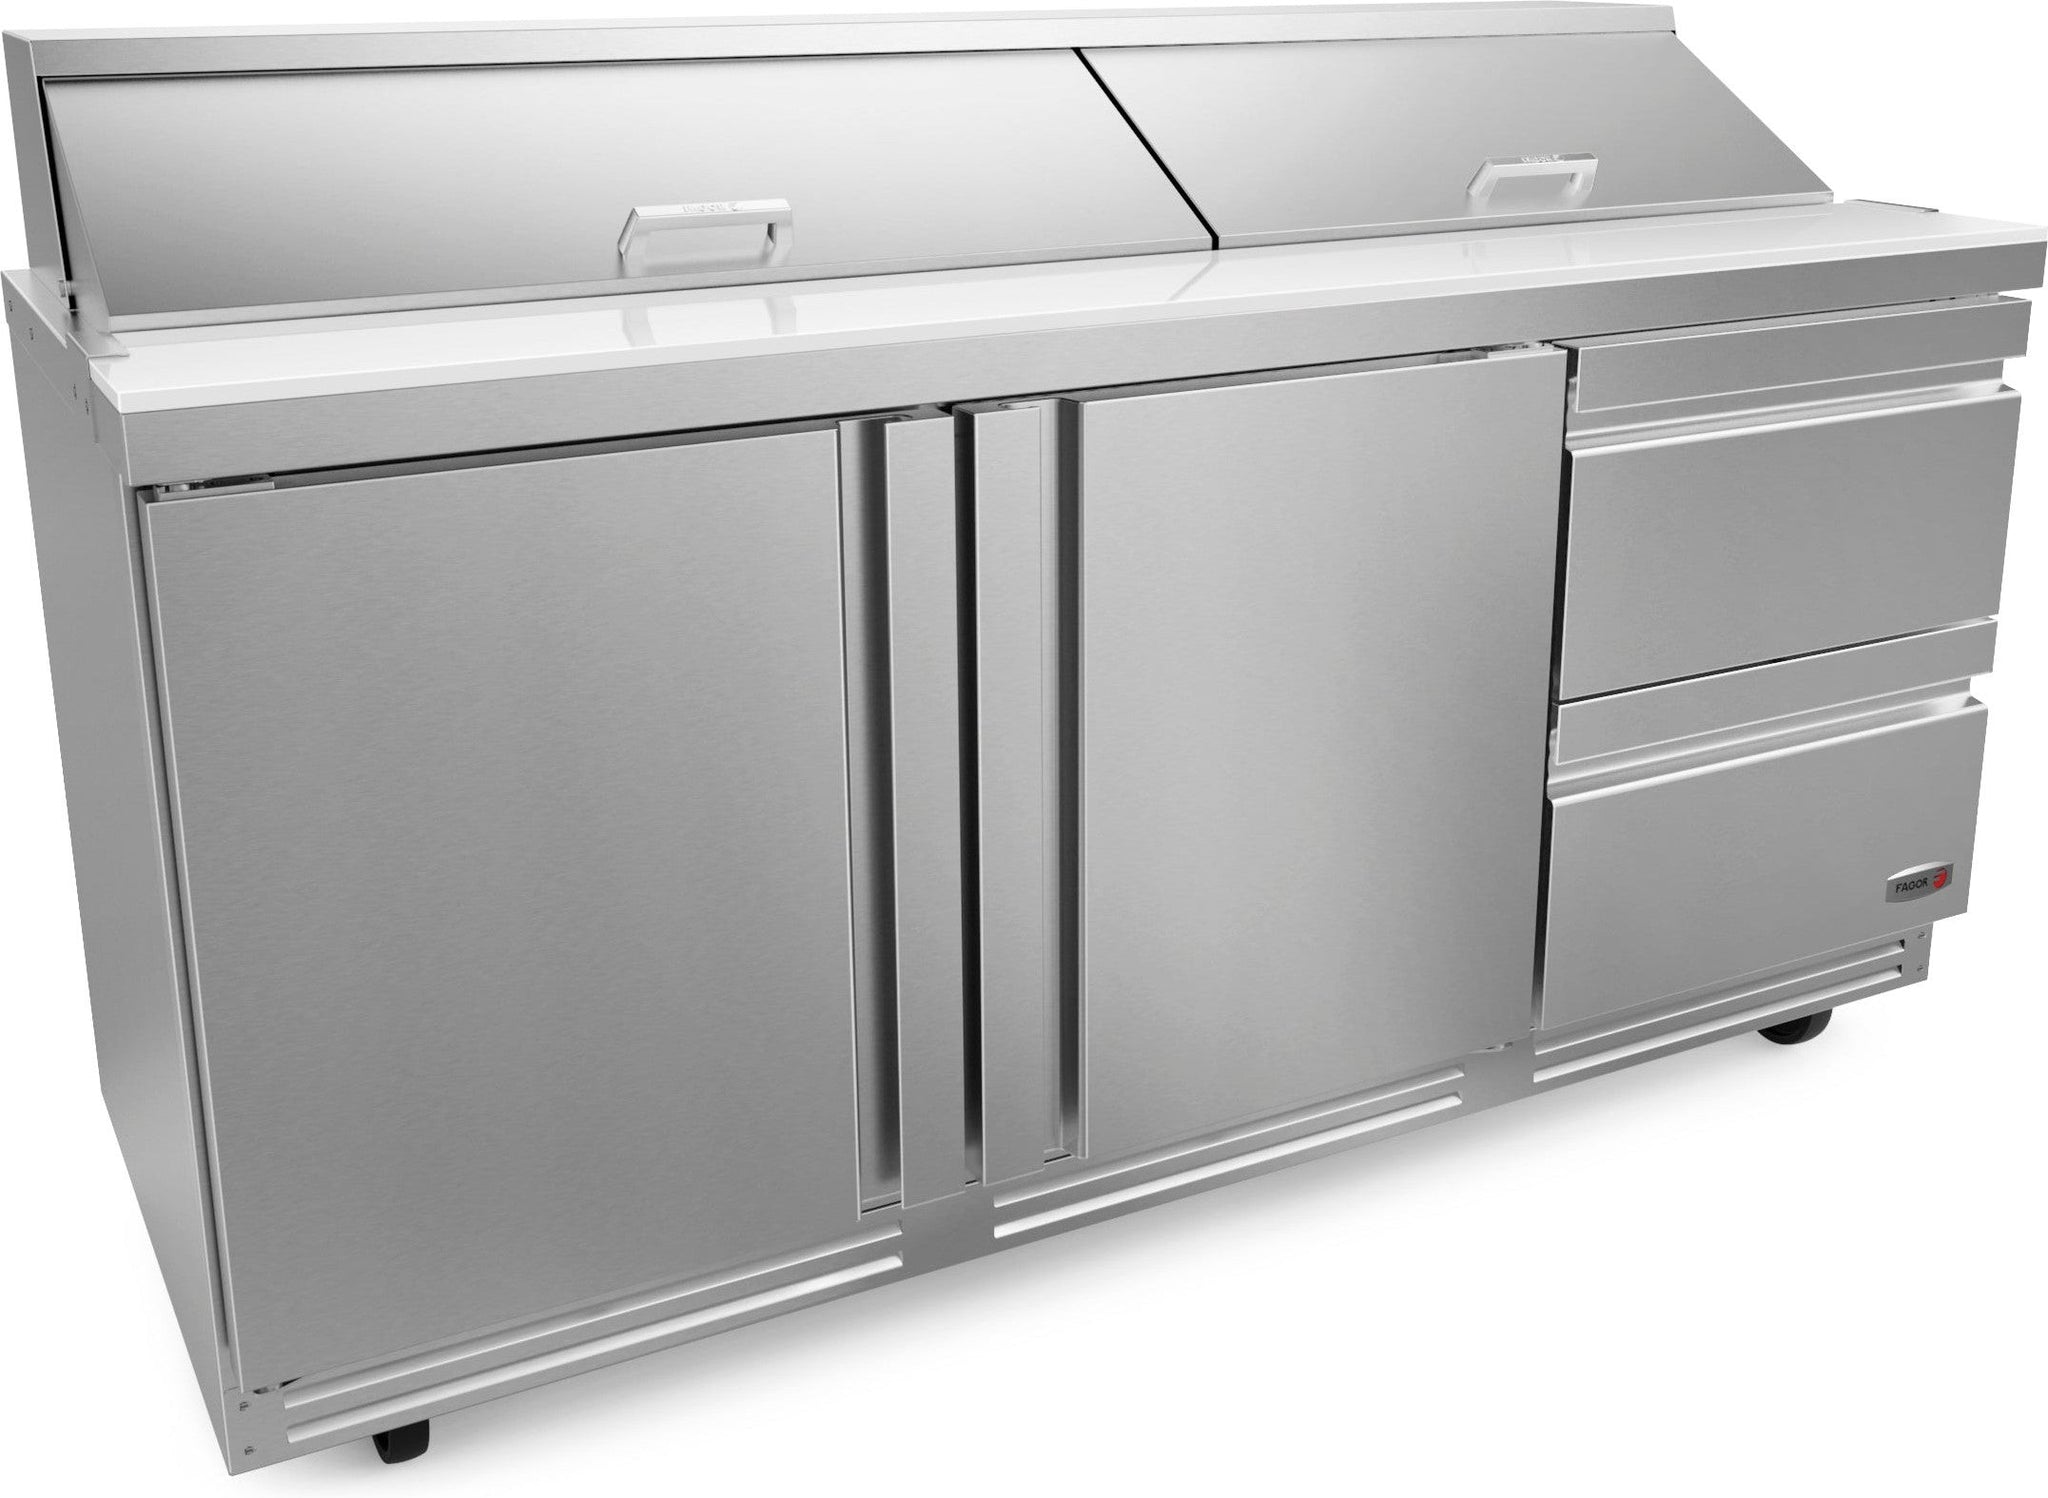 Fagor - 115 V, cu. 18 ft. Double Door Refrigerated Salad/Sandwich Prep Table With Two Drawer - FST-72-18-D2-N